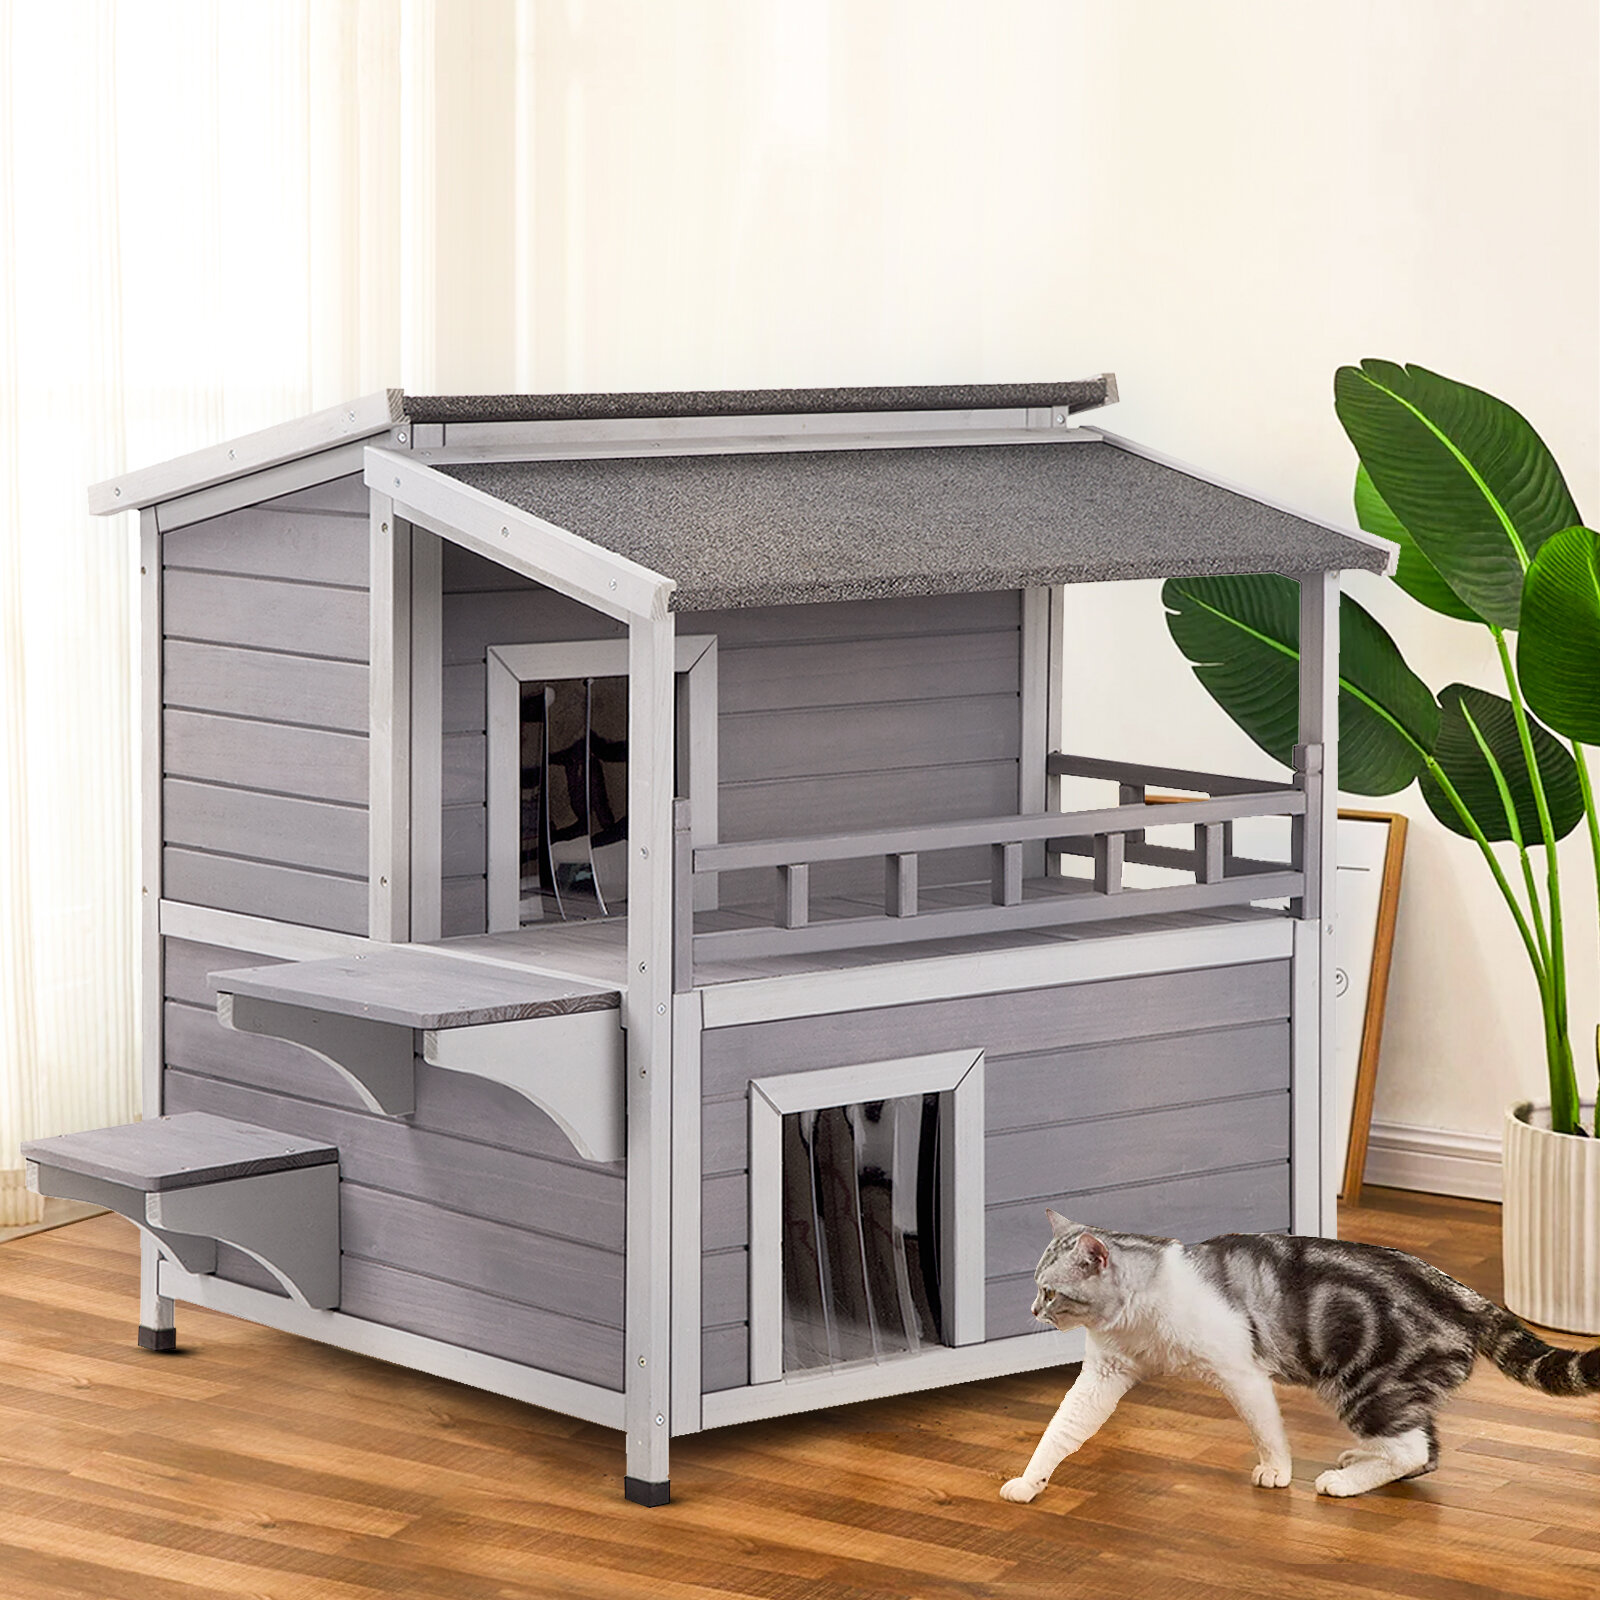 Bedding for Outdoor Cat Houses & Shelters